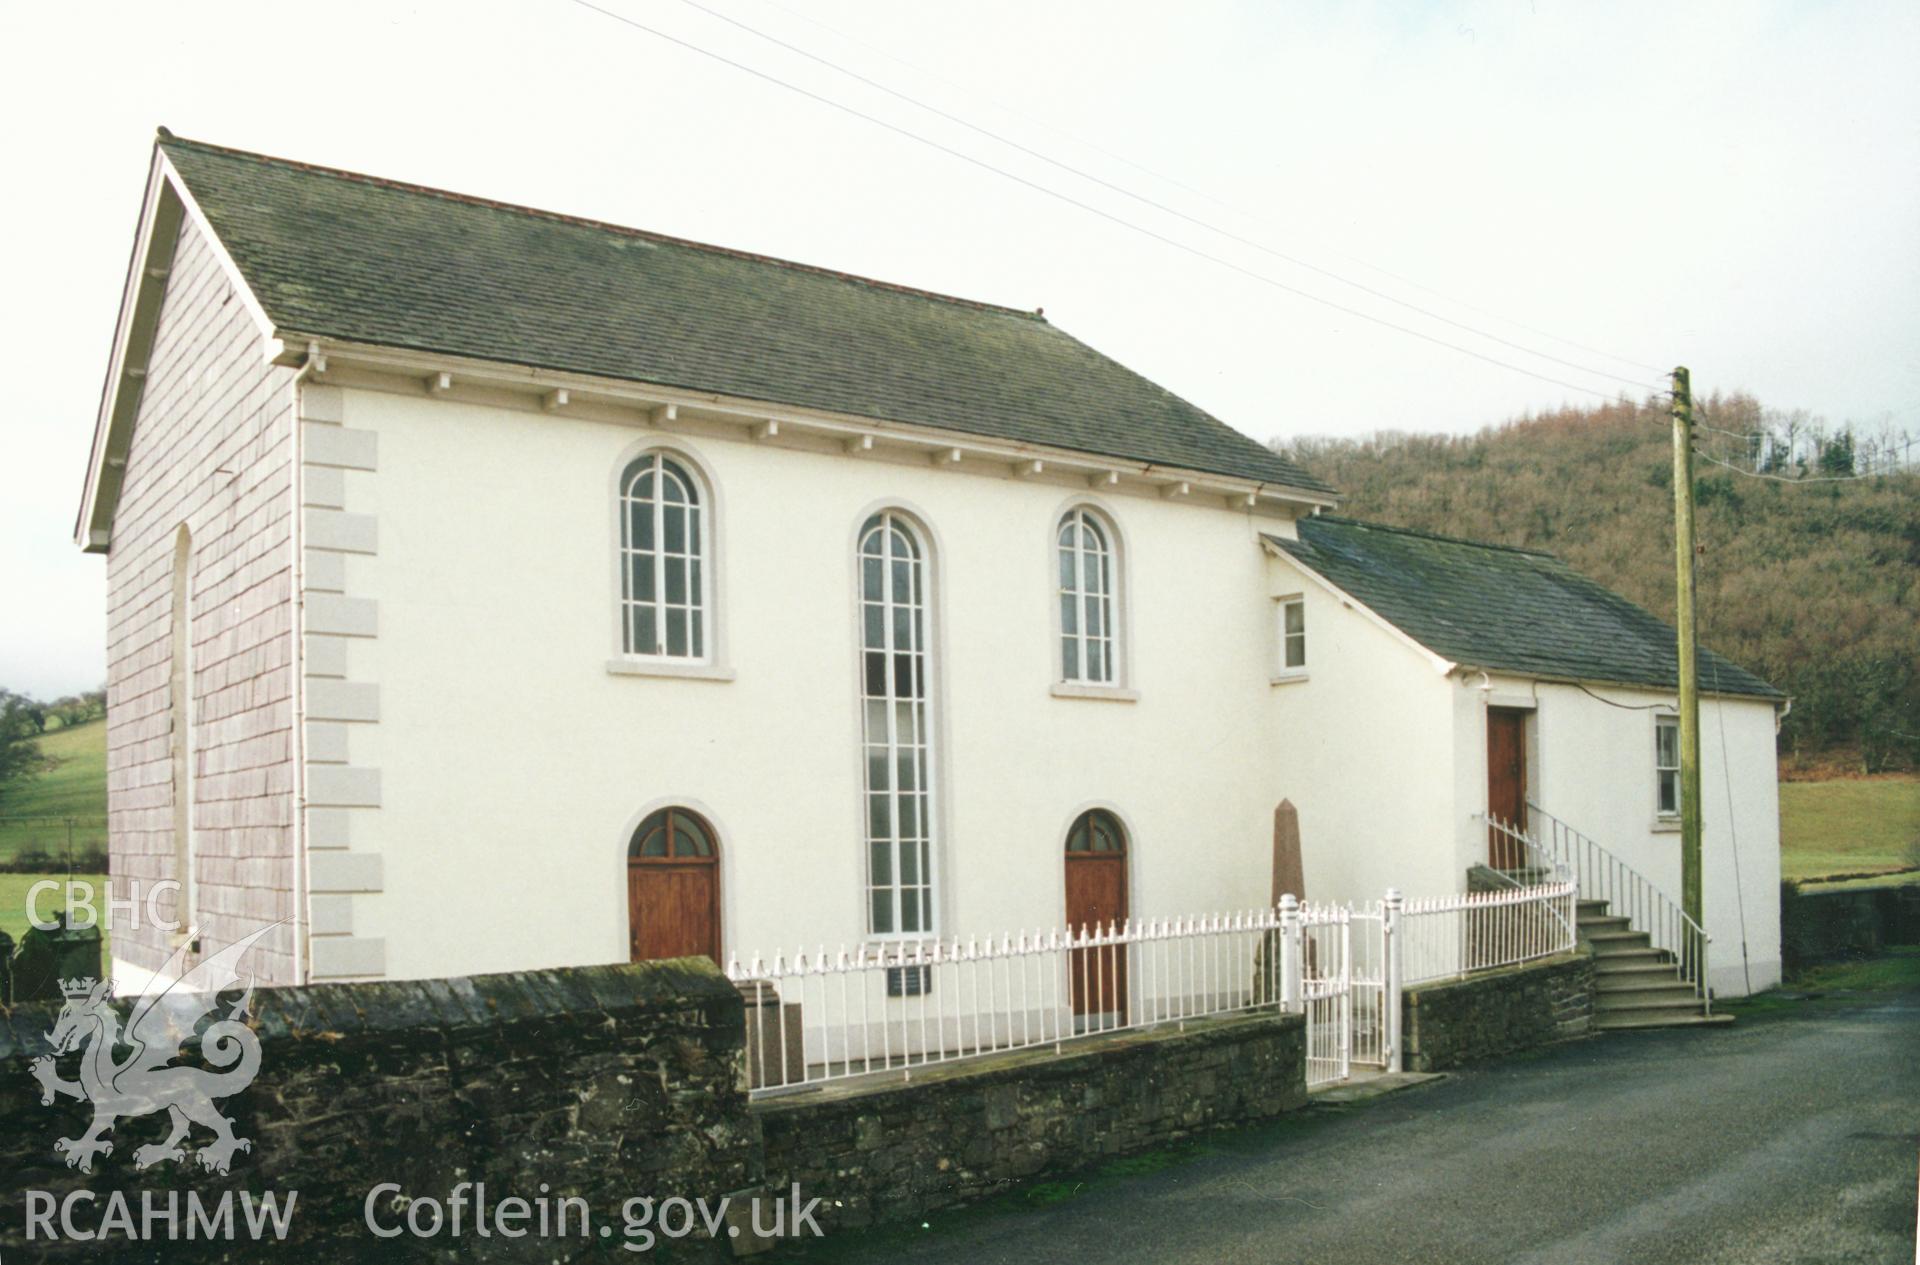 Digital copy of a colour photograph showing an exterior view of Crug y Bar Welsh Independent Chapel, taken by Robert Scourfield, c.1996.